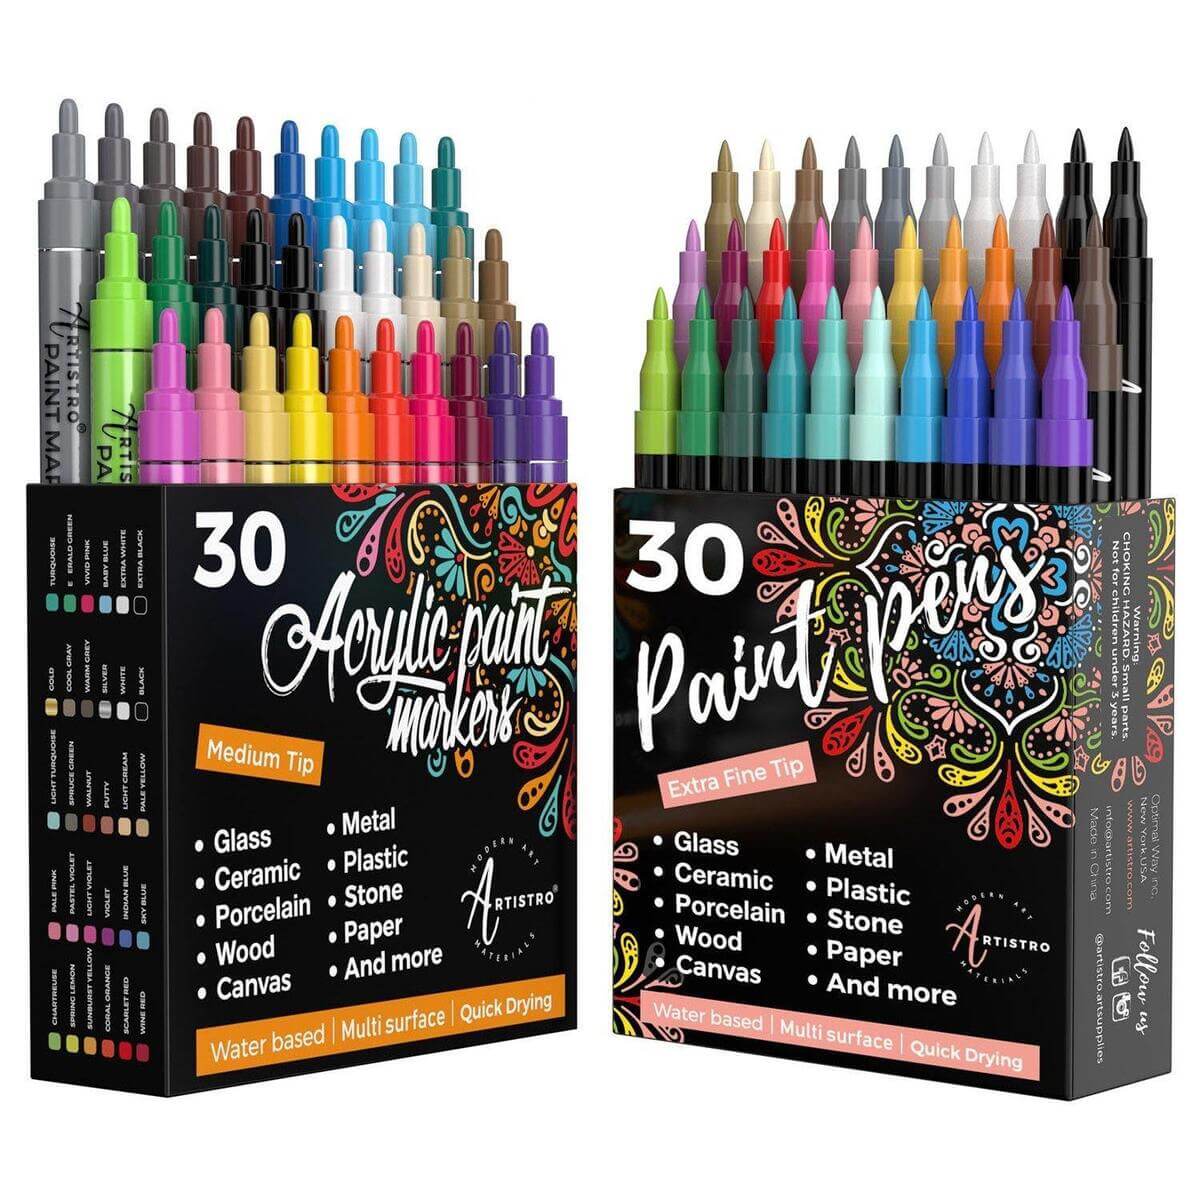 https://artistro.com/cdn/shop/products/60-markers-for-art-30-acrylic-extra-fine-tip-paint-pens-30-acrylic-medium-tip-paint-pens-for-rock-wood-glass-ceramic-metal-painting-224552_1200x.jpg?v=1639066749